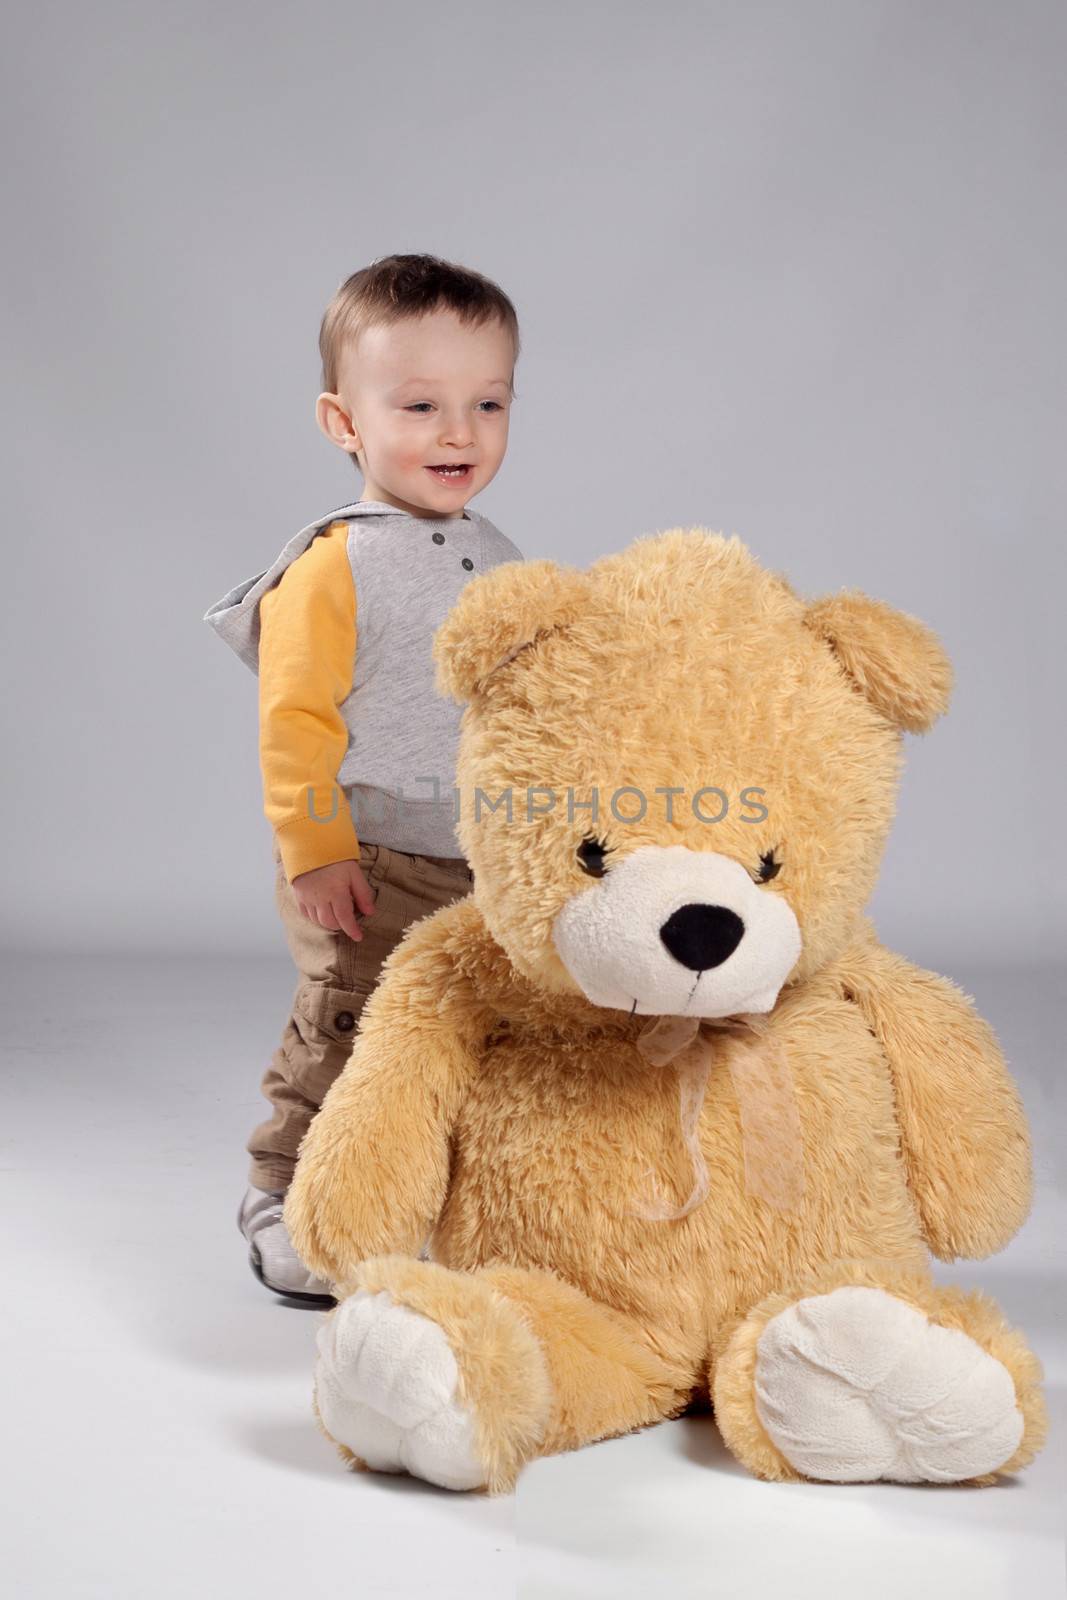 Toddler boy standing in a sweatshirt and sneakers behind a big teddy bear